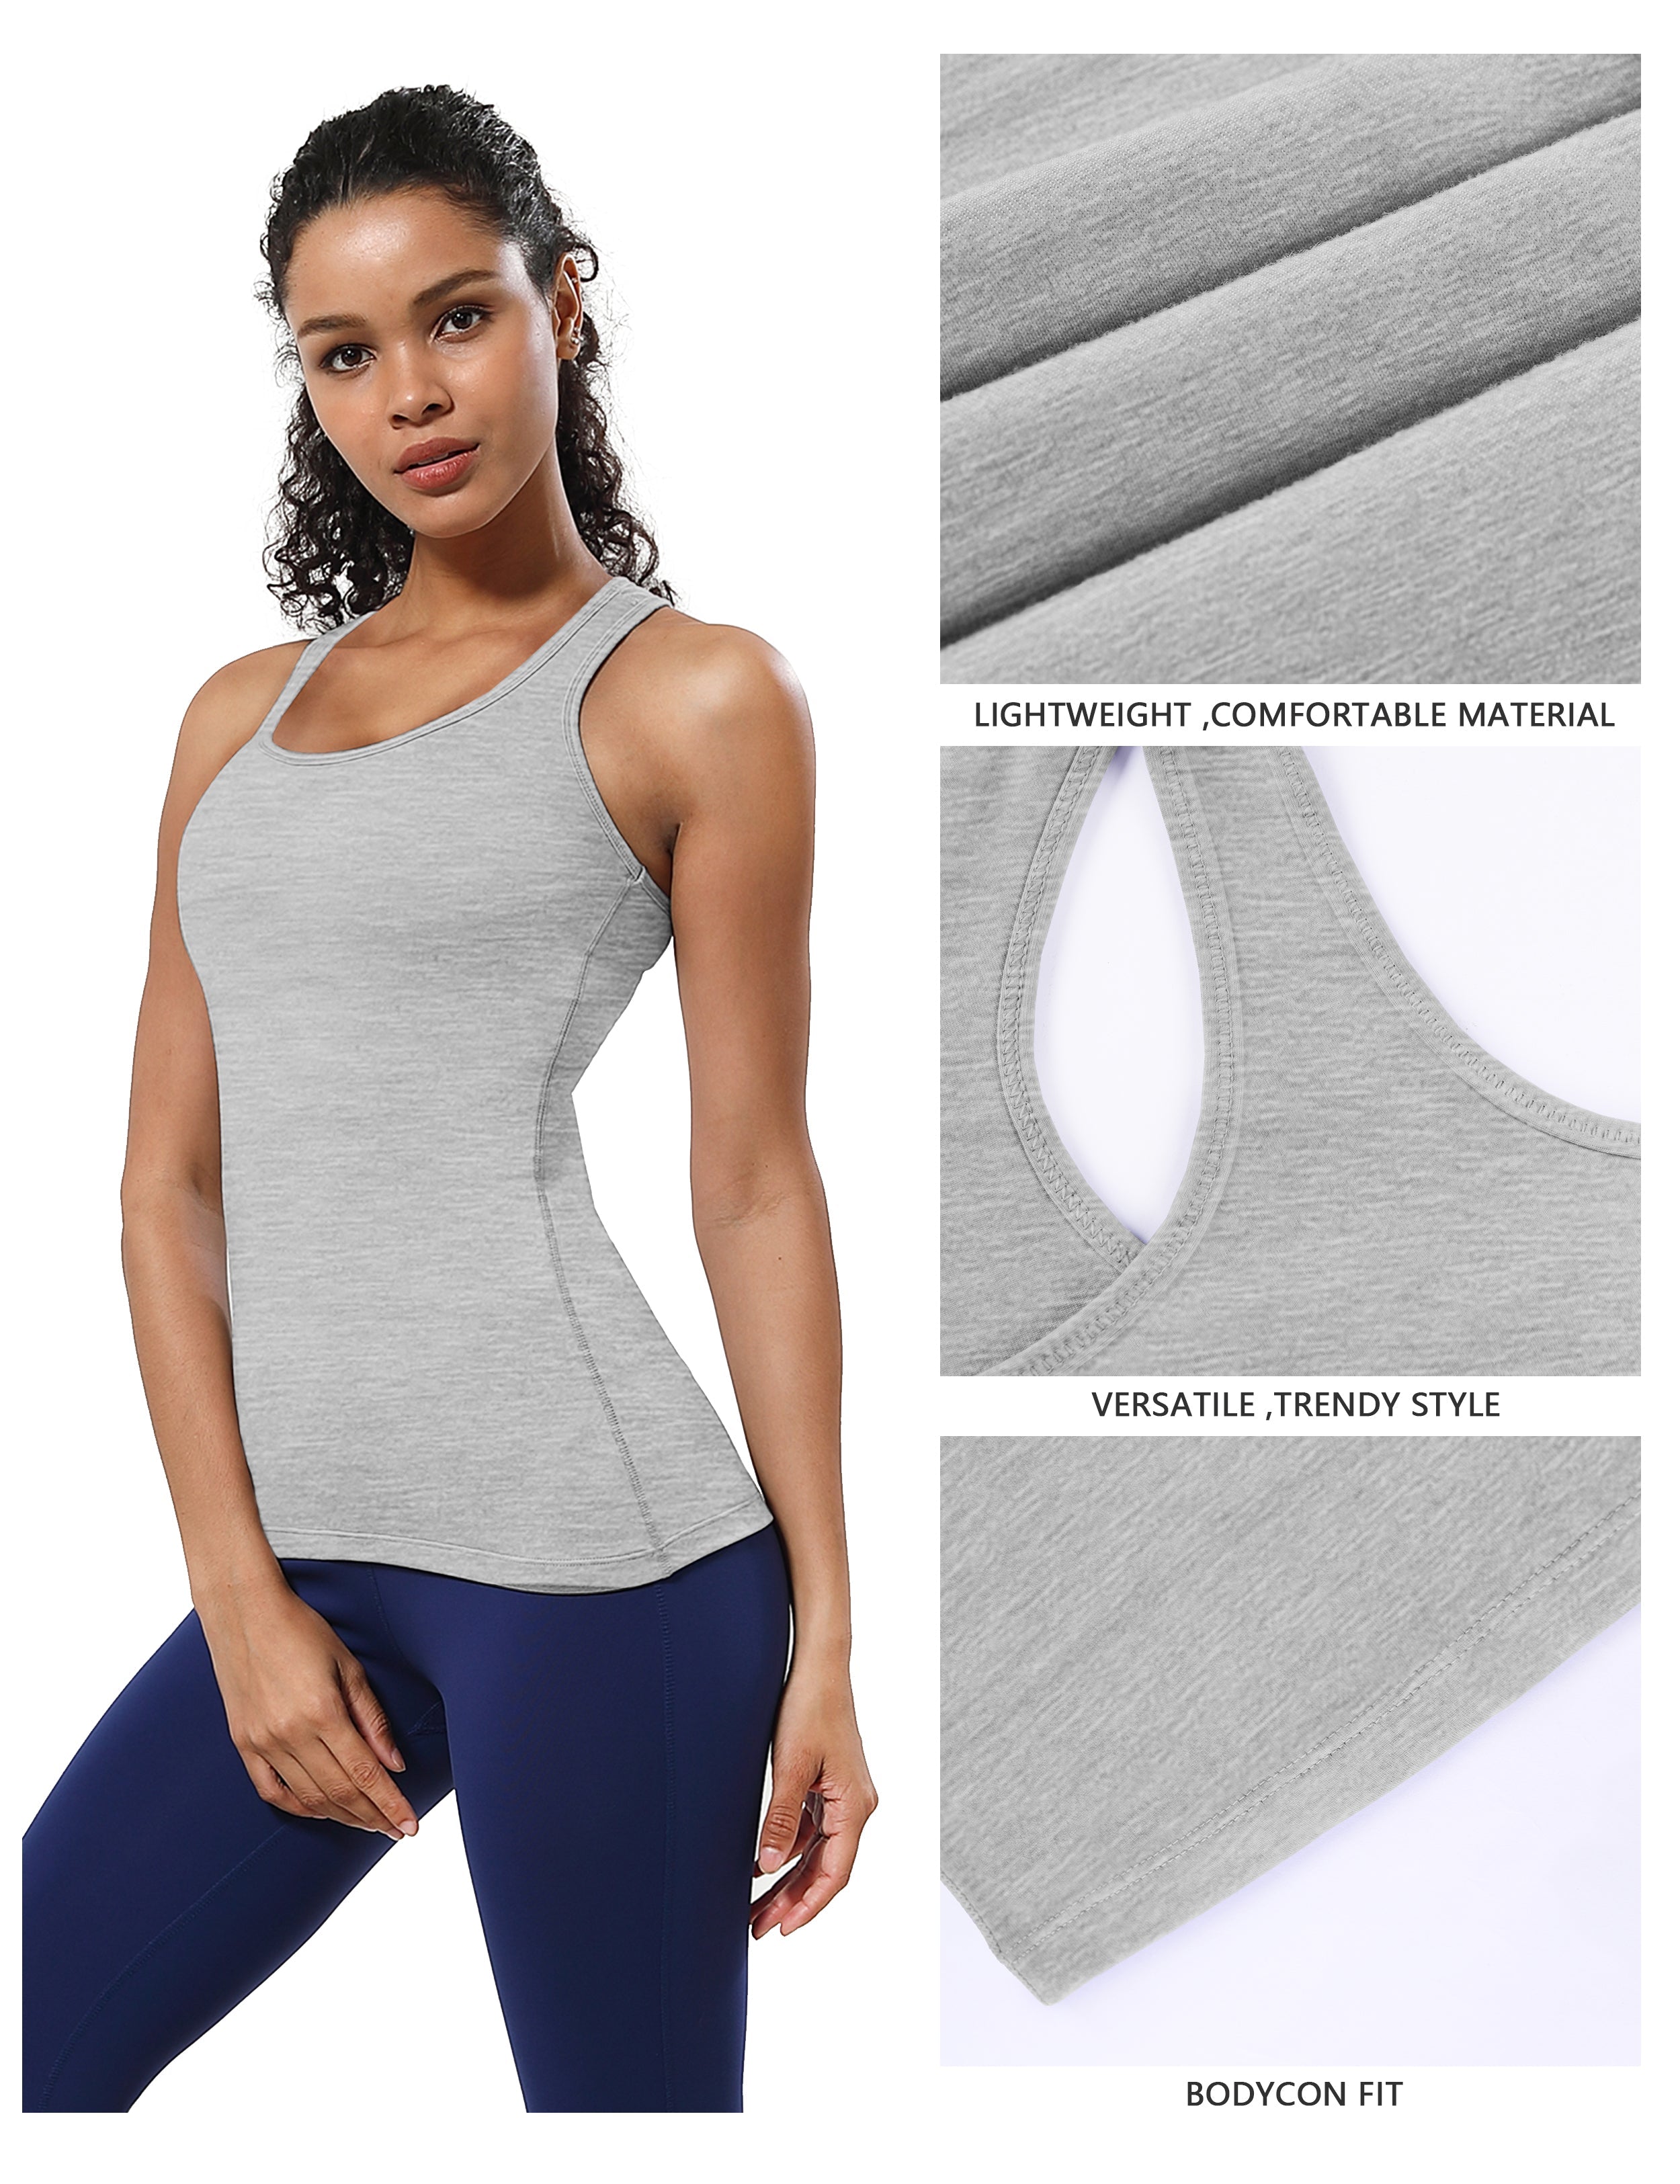 Racerback Athletic Tank Tops heathergray 92%Nylon/8%Spandex(Cotton Soft) Designed for Golf Tight Fit So buttery soft, it feels weightless Sweat-wicking Four-way stretch Breathable Contours your body Sits below the waistband for moderate, everyday coverage